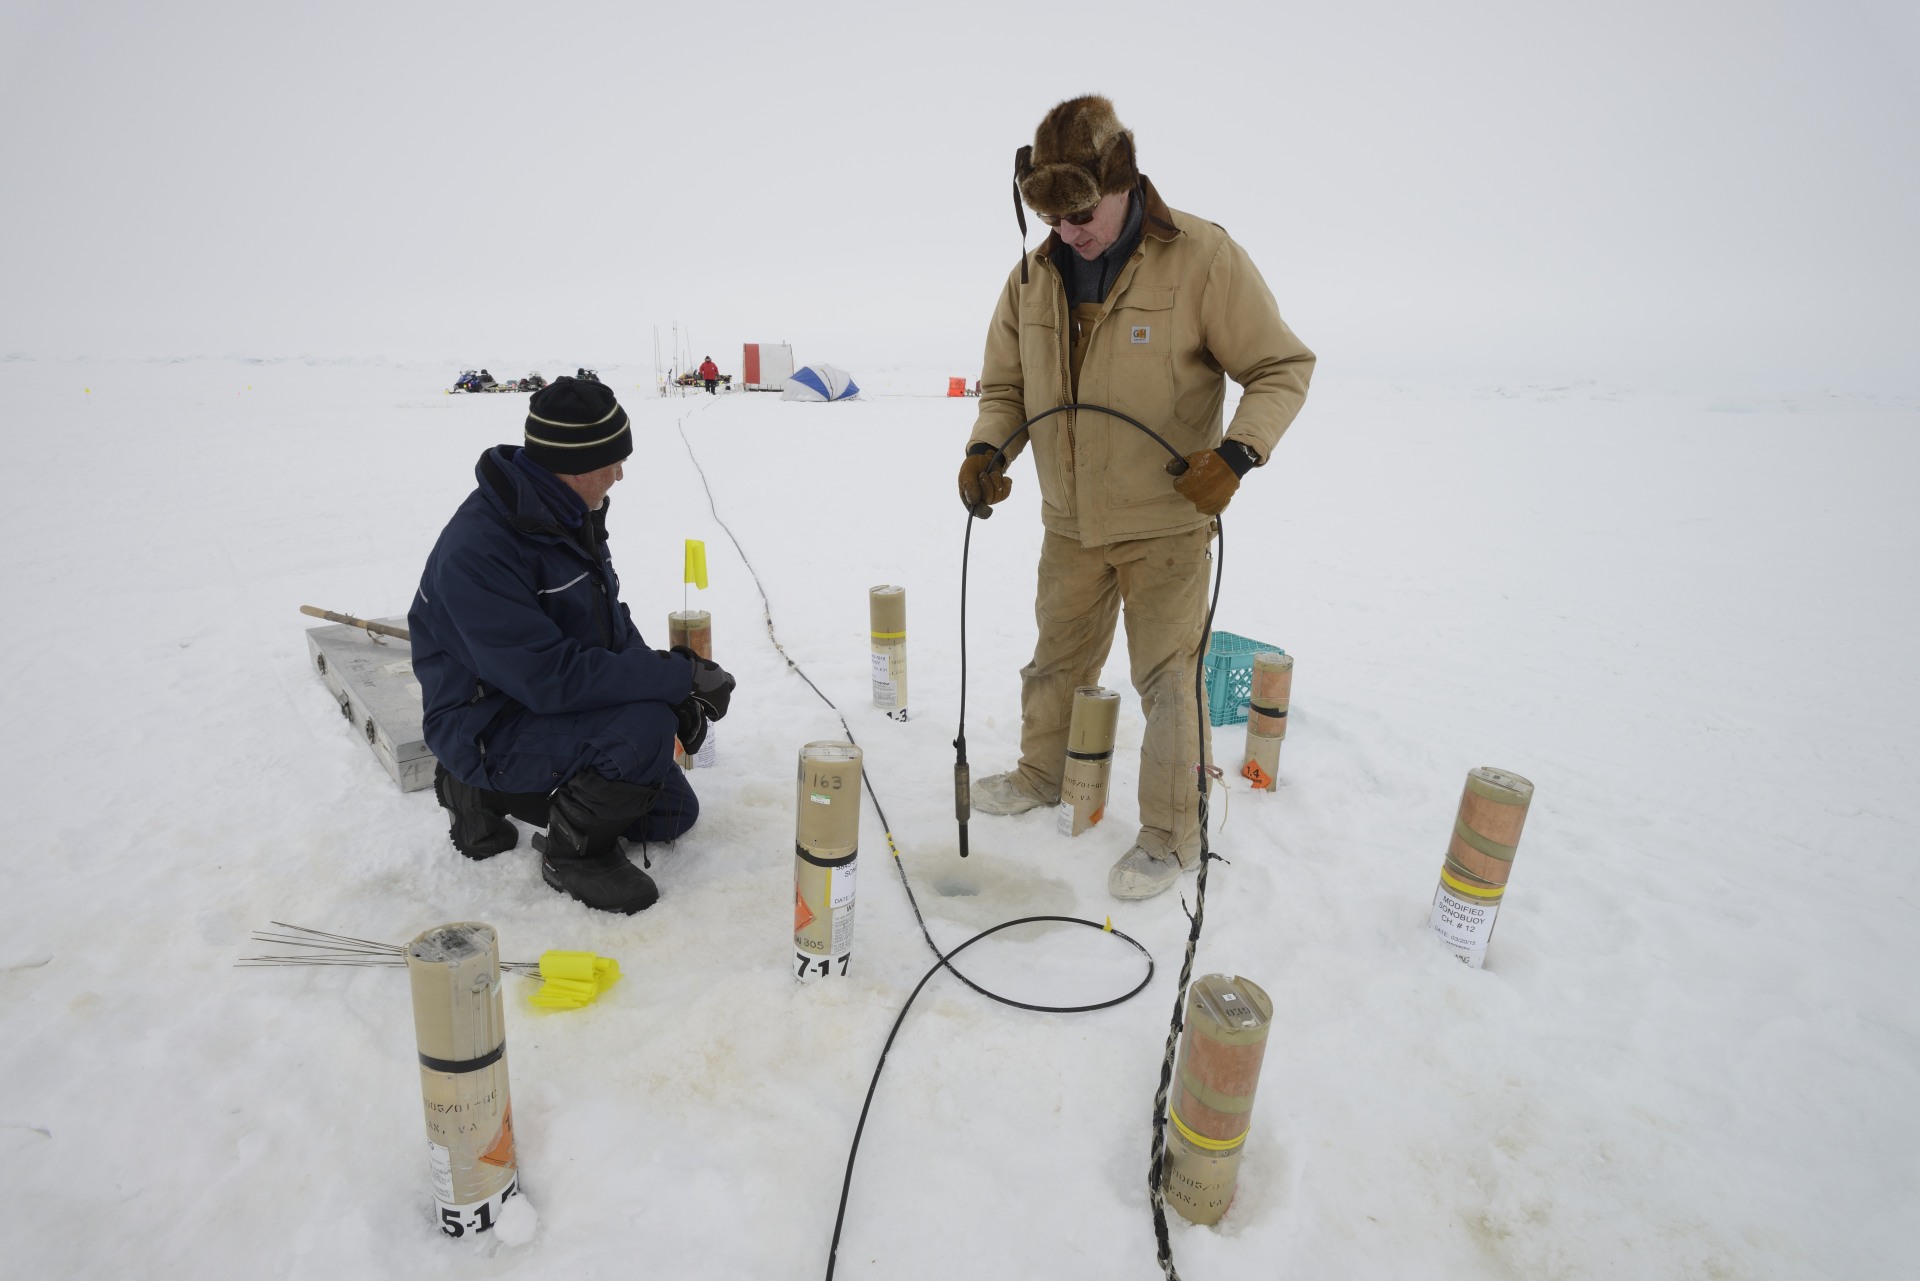 Hydrophones are put in the ice to monitor sound.
Photo by Janice Lang, DRDC